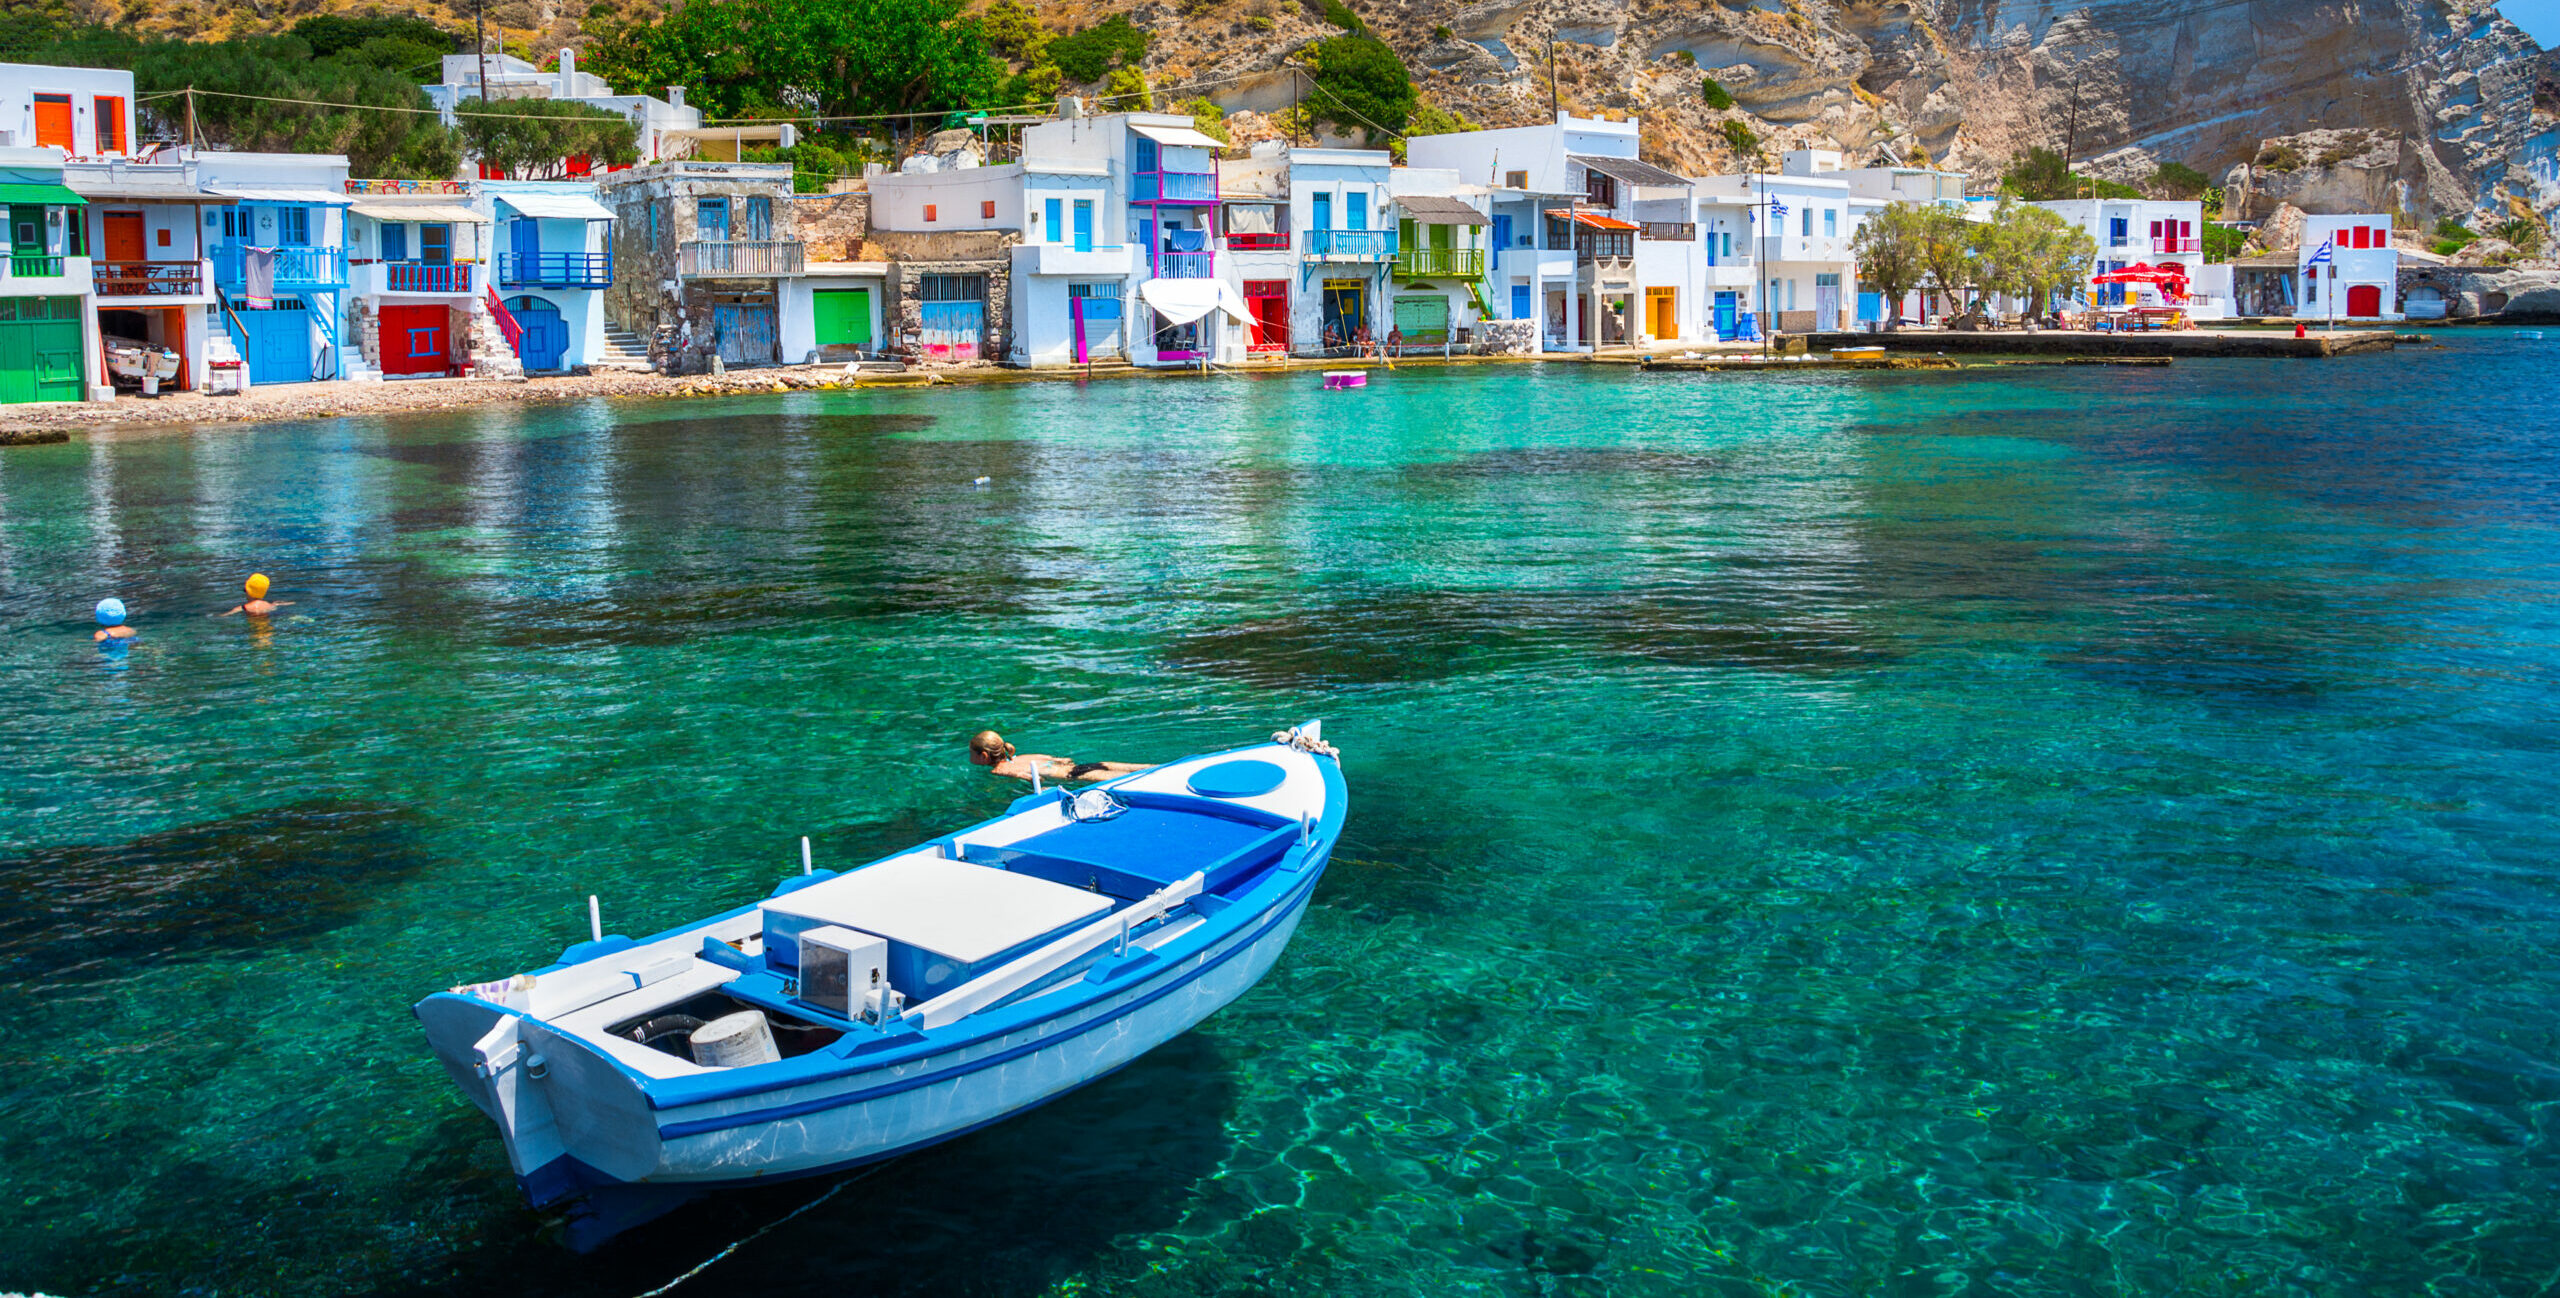 Milos: The recipe you should try on the island and cook for yourself